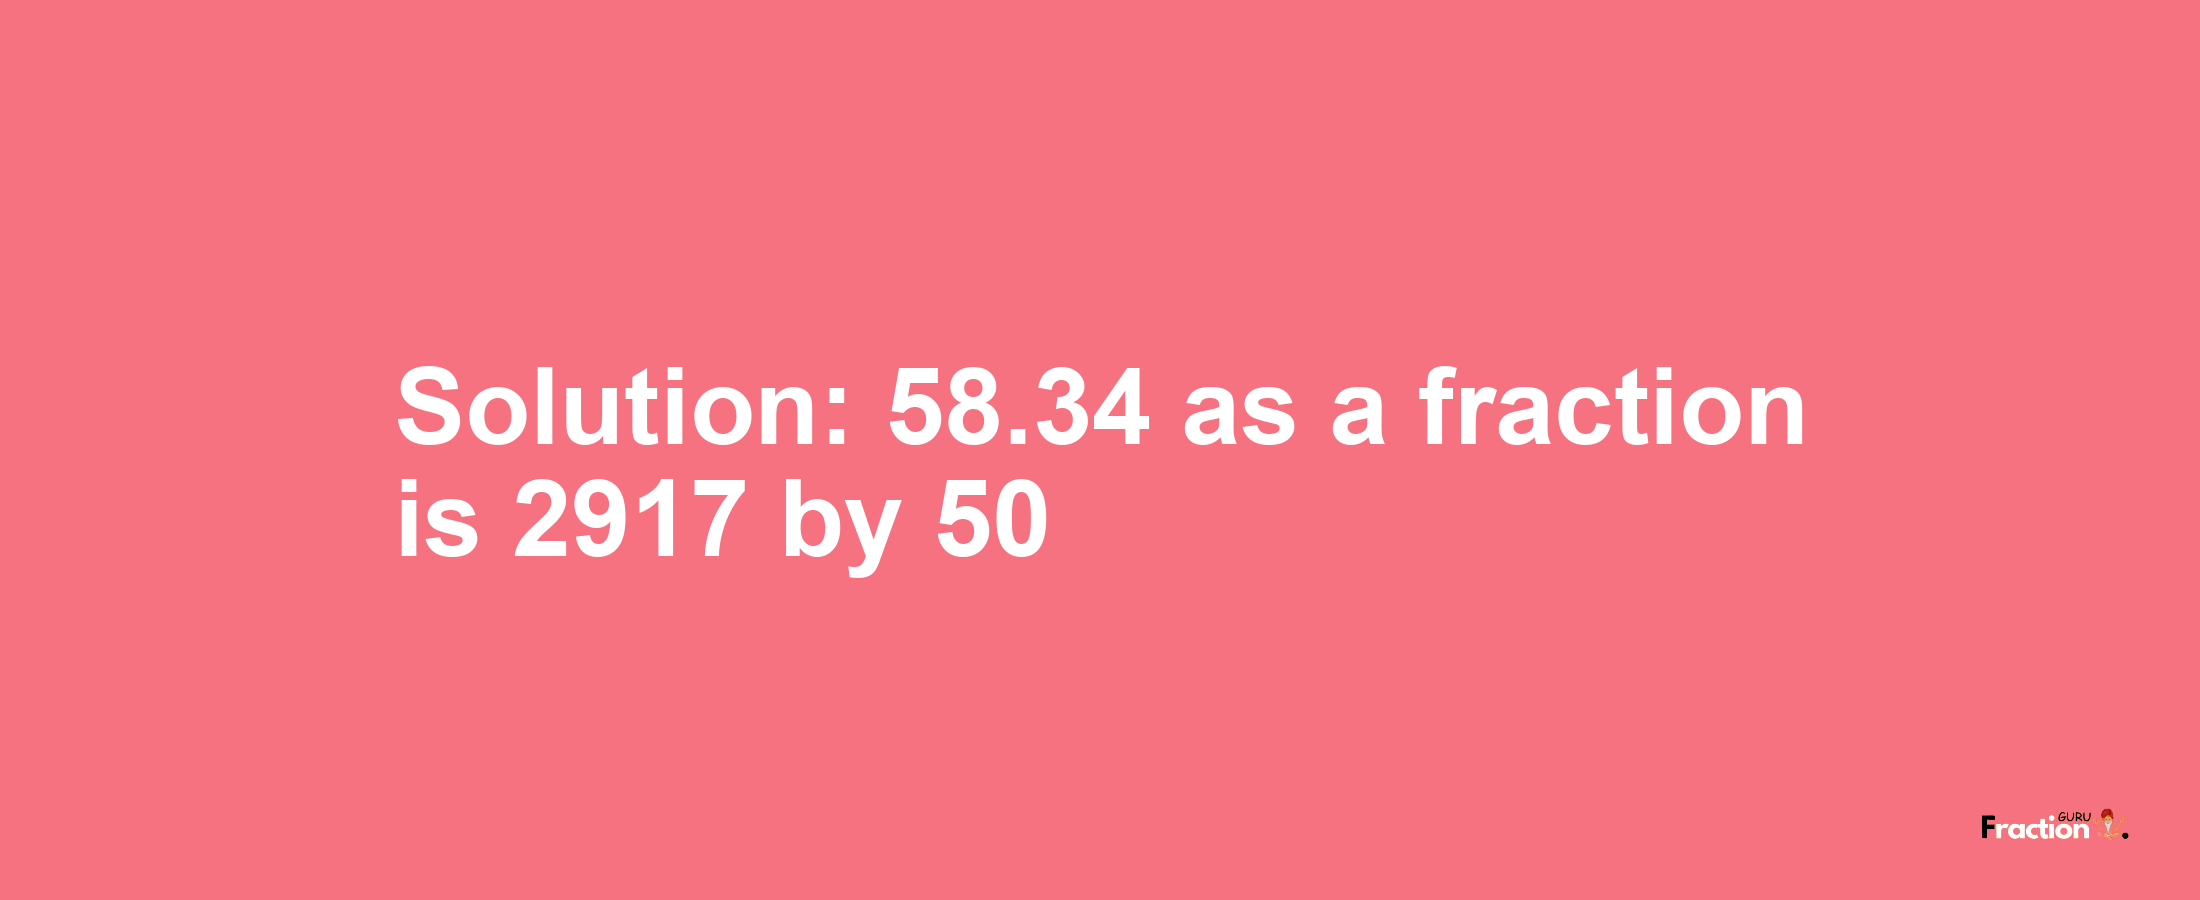 Solution:58.34 as a fraction is 2917/50